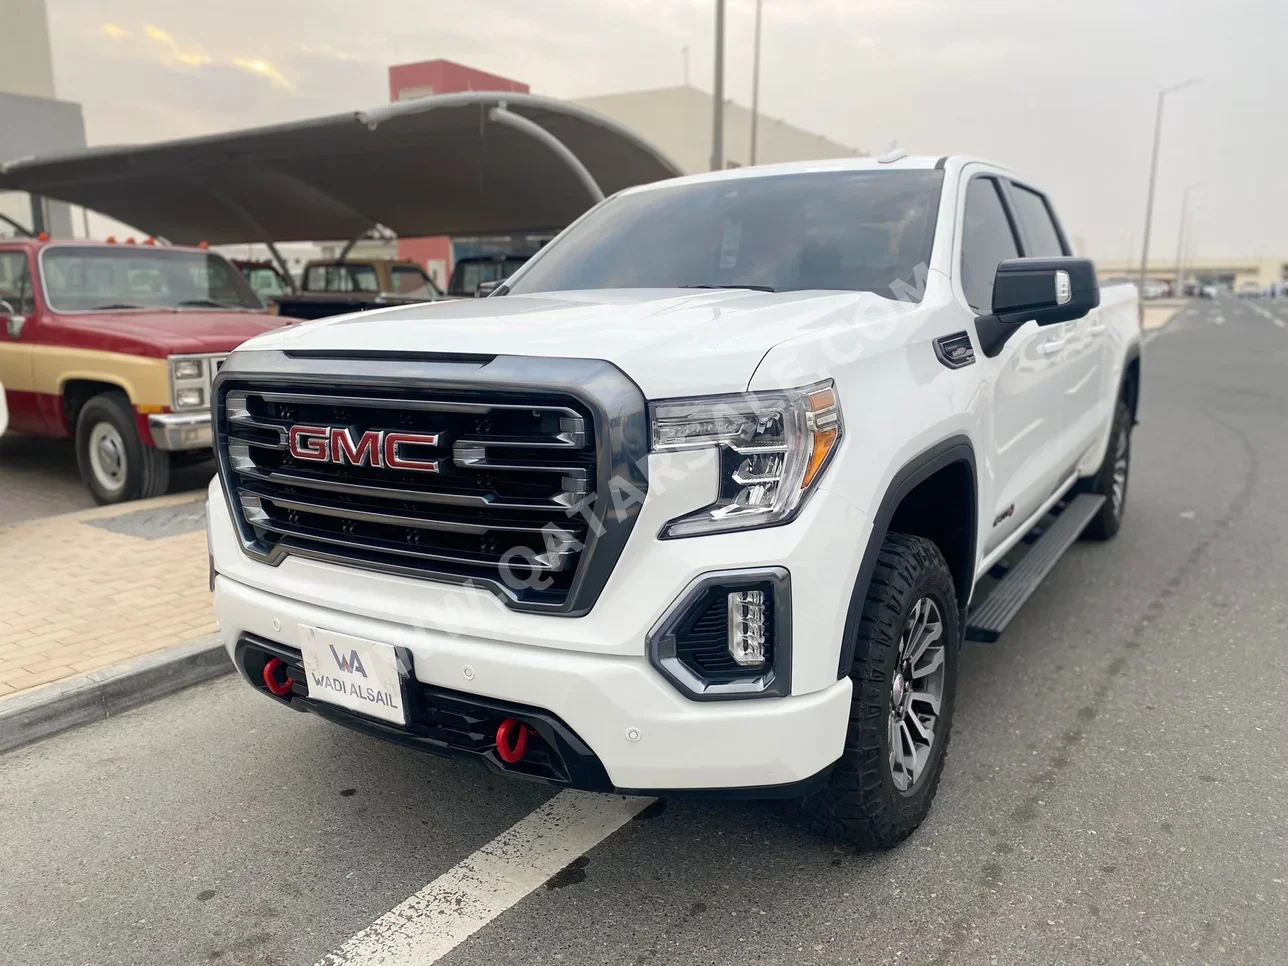 GMC  Sierra  AT4  2022  Automatic  60,000 Km  8 Cylinder  Four Wheel Drive (4WD)  Pick Up  White  With Warranty